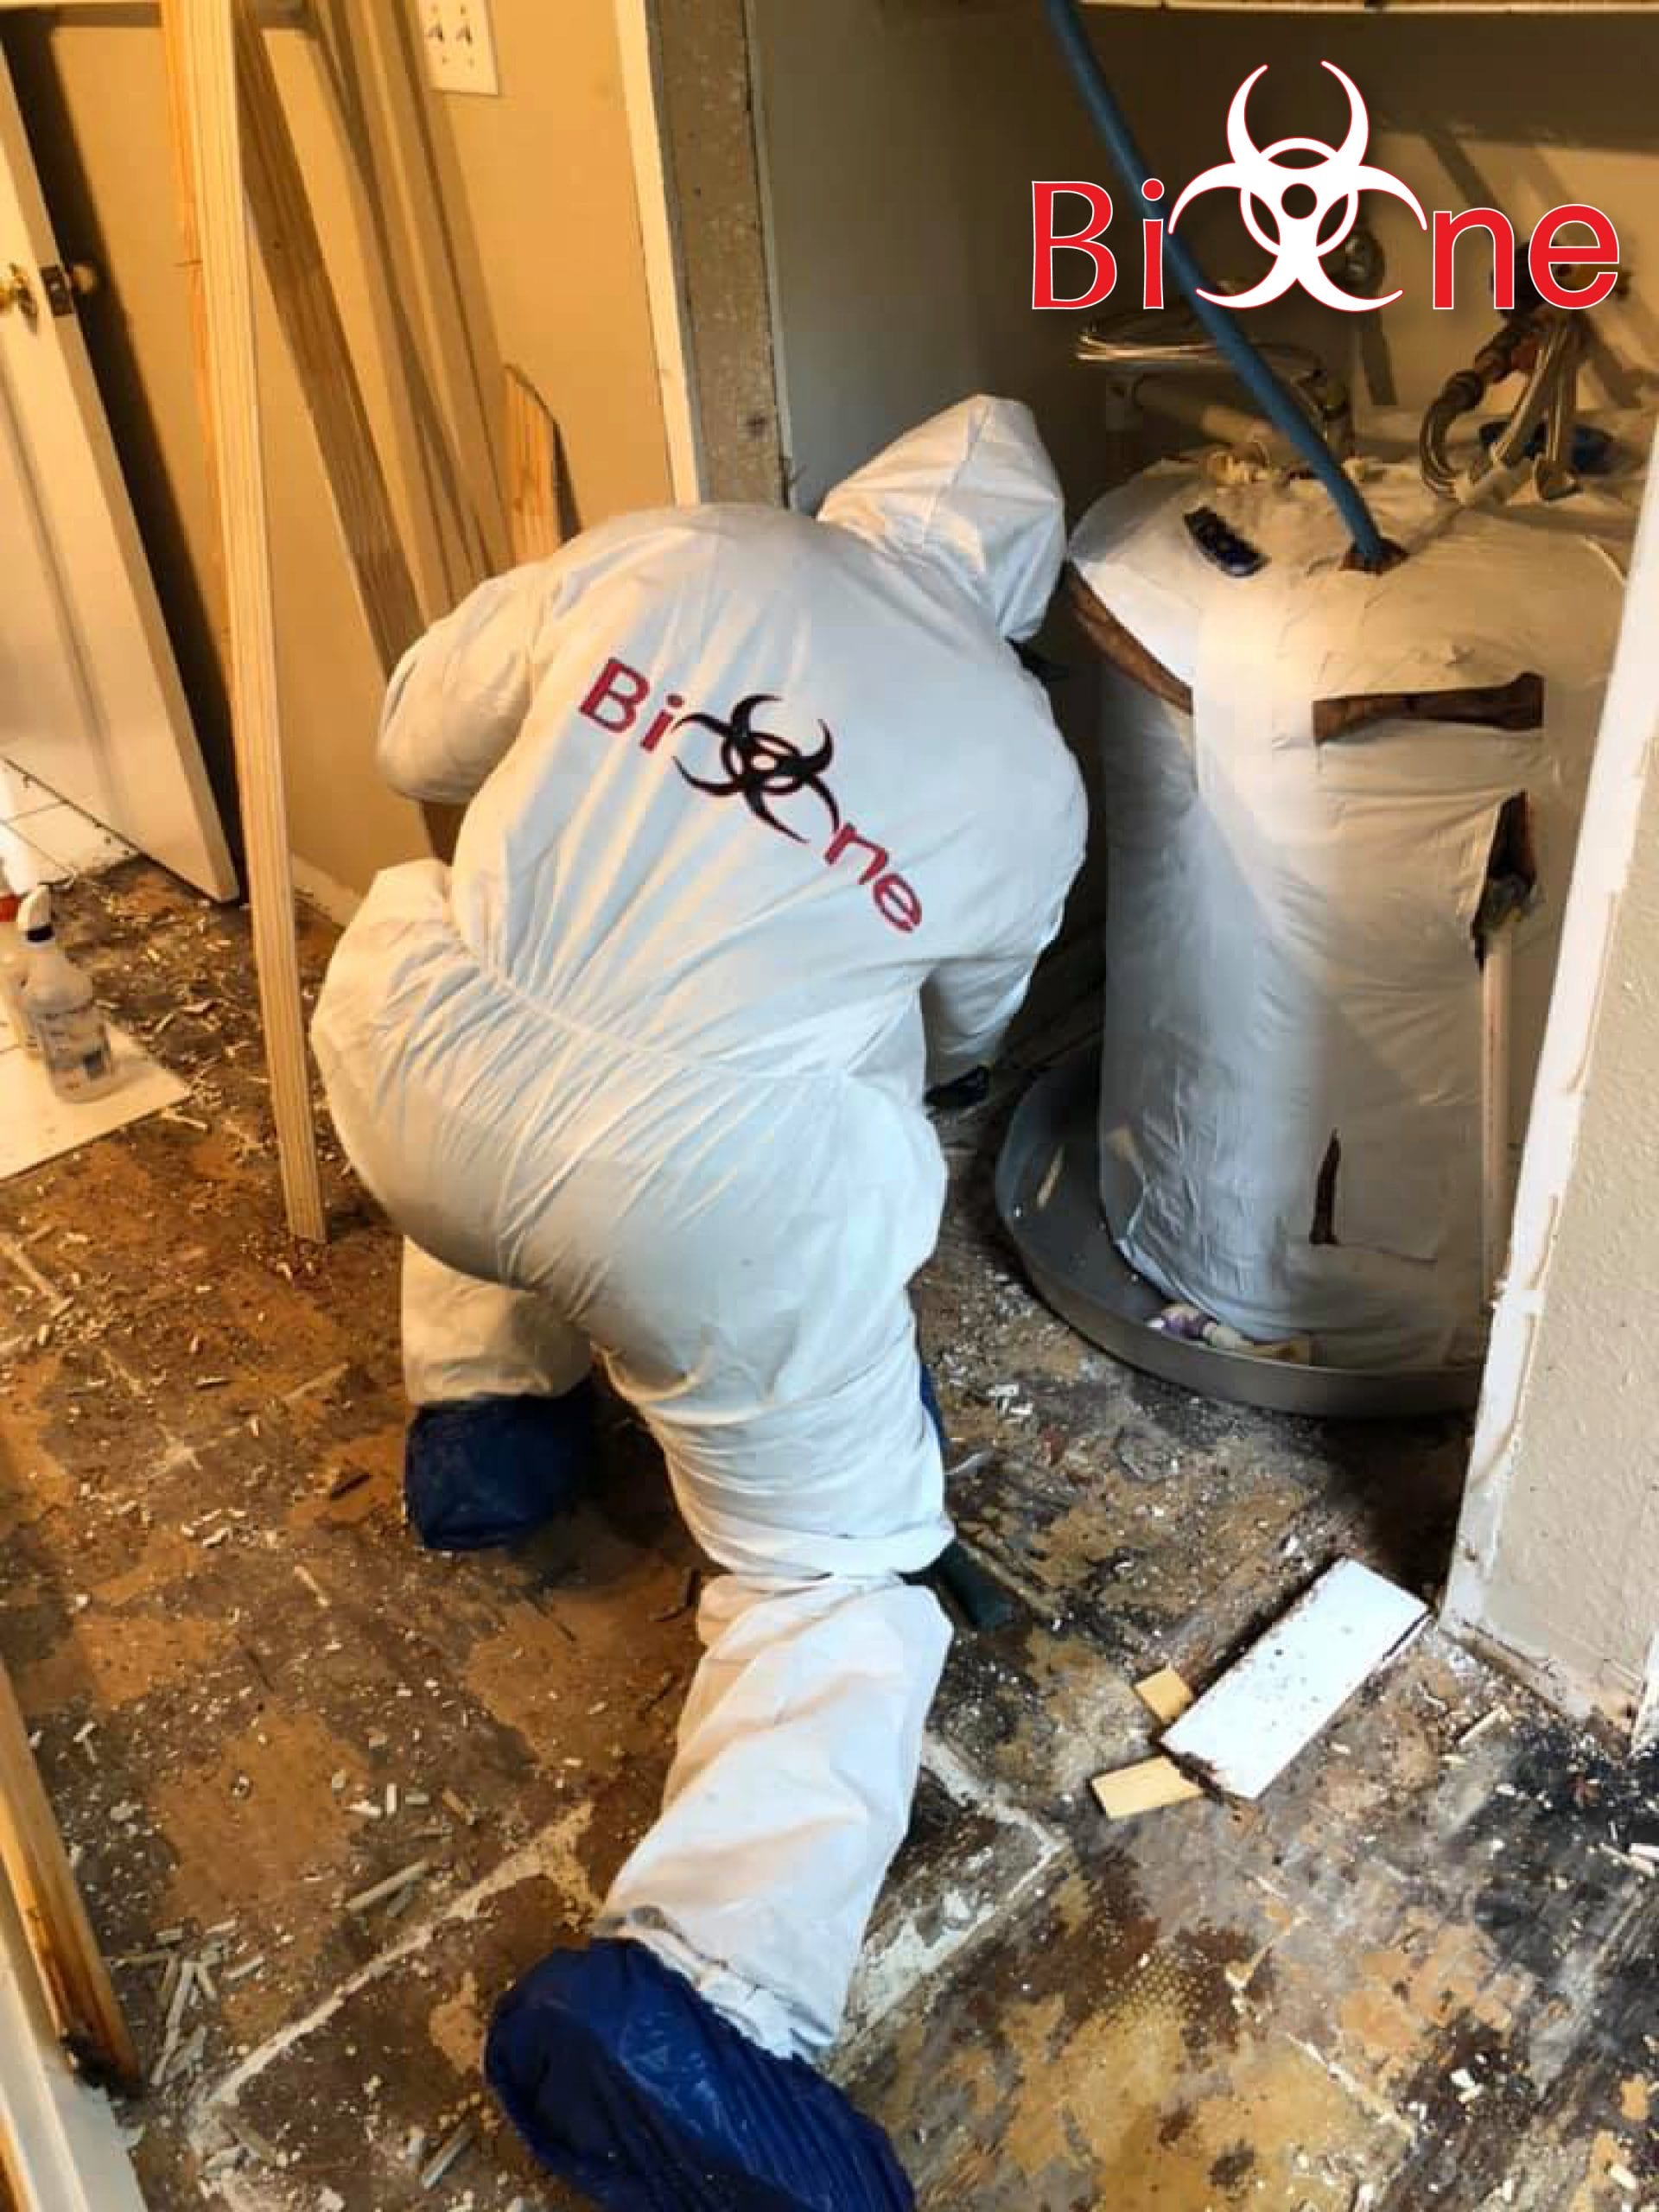 Bio-One of Orange certified technicians will thoroughly revise the house or property for possible mold damage.